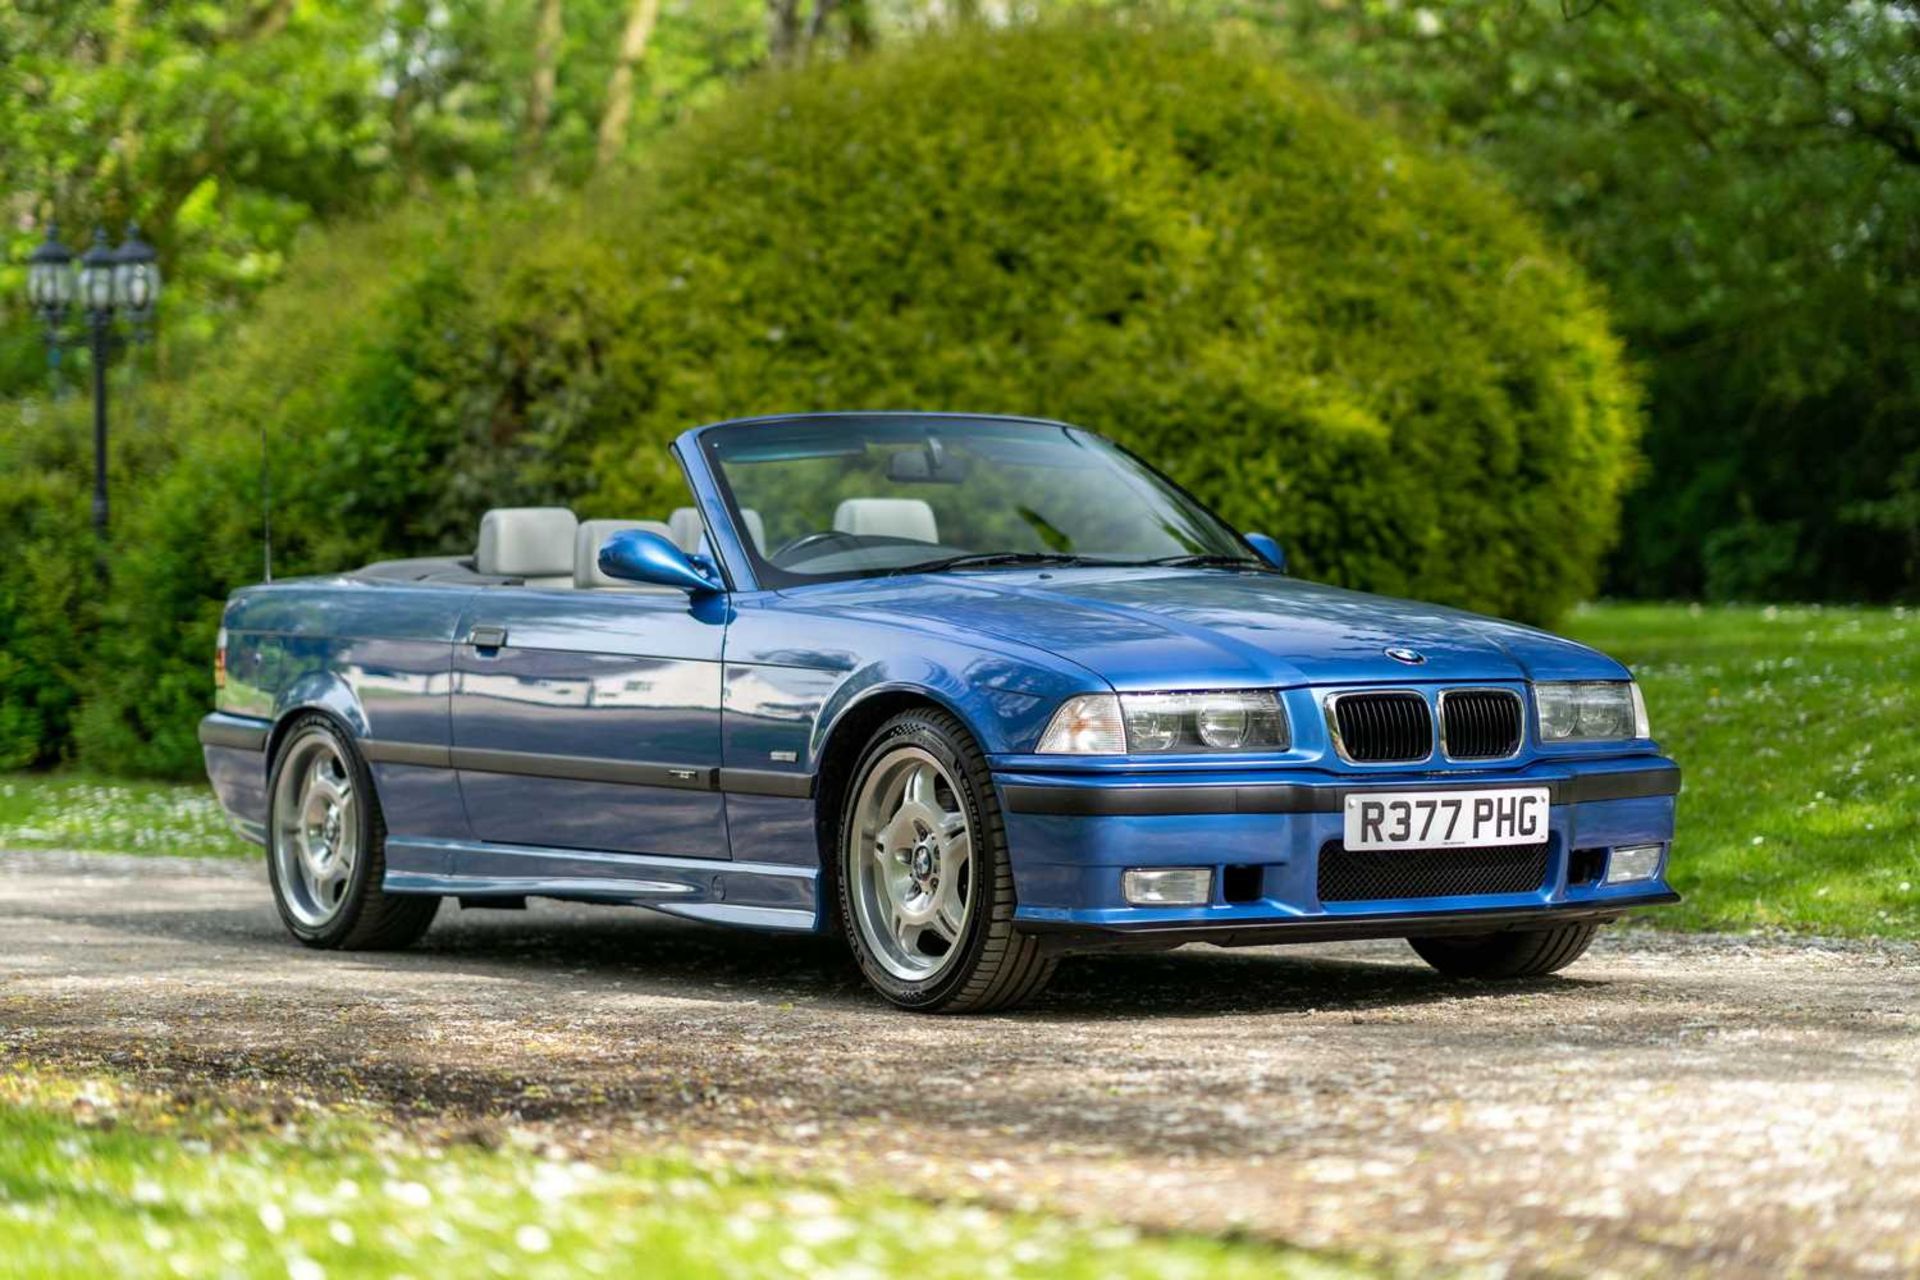 1998 BMW M3 Evolution Convertible Only 54,000 miles and full service history - Image 2 of 89